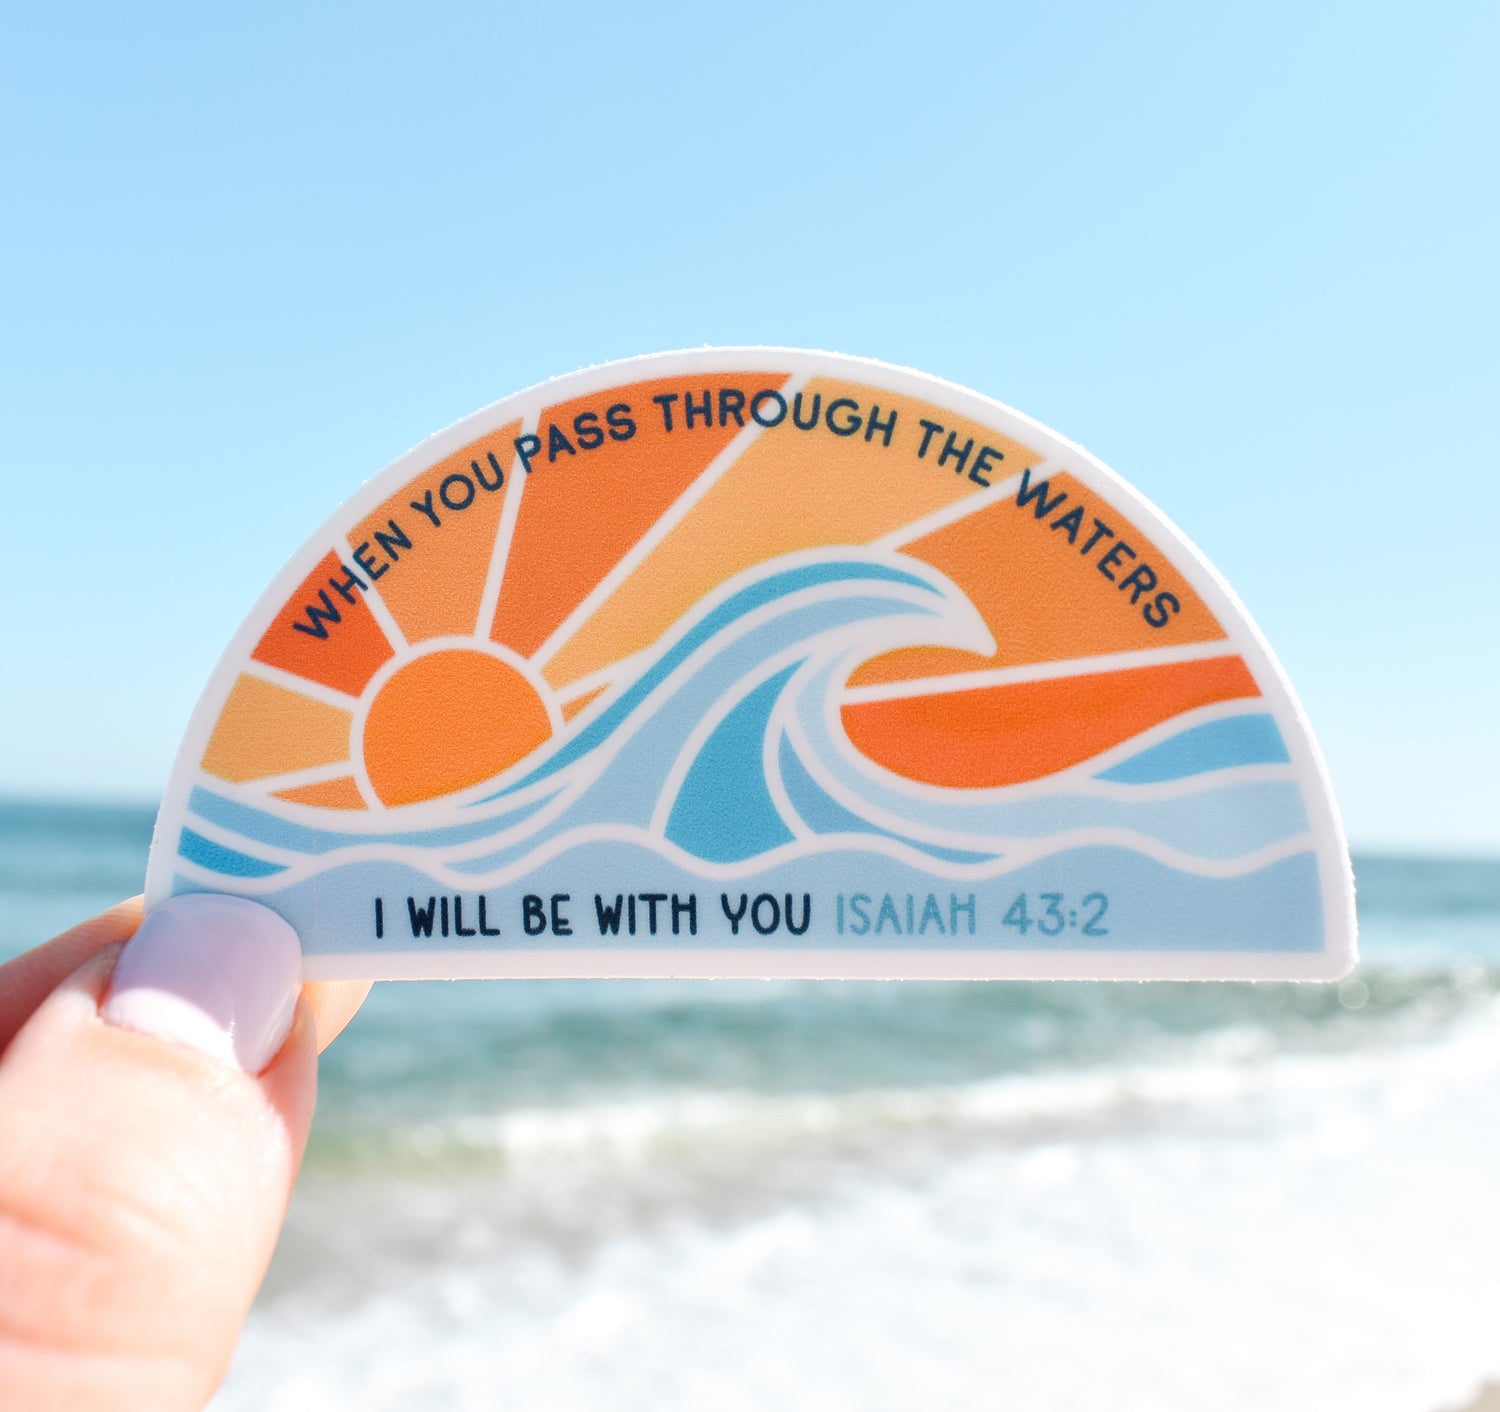 When You Pass Through The Waters, Isaiah 43:2 Bible verse sticker with an ocean wave at sunset